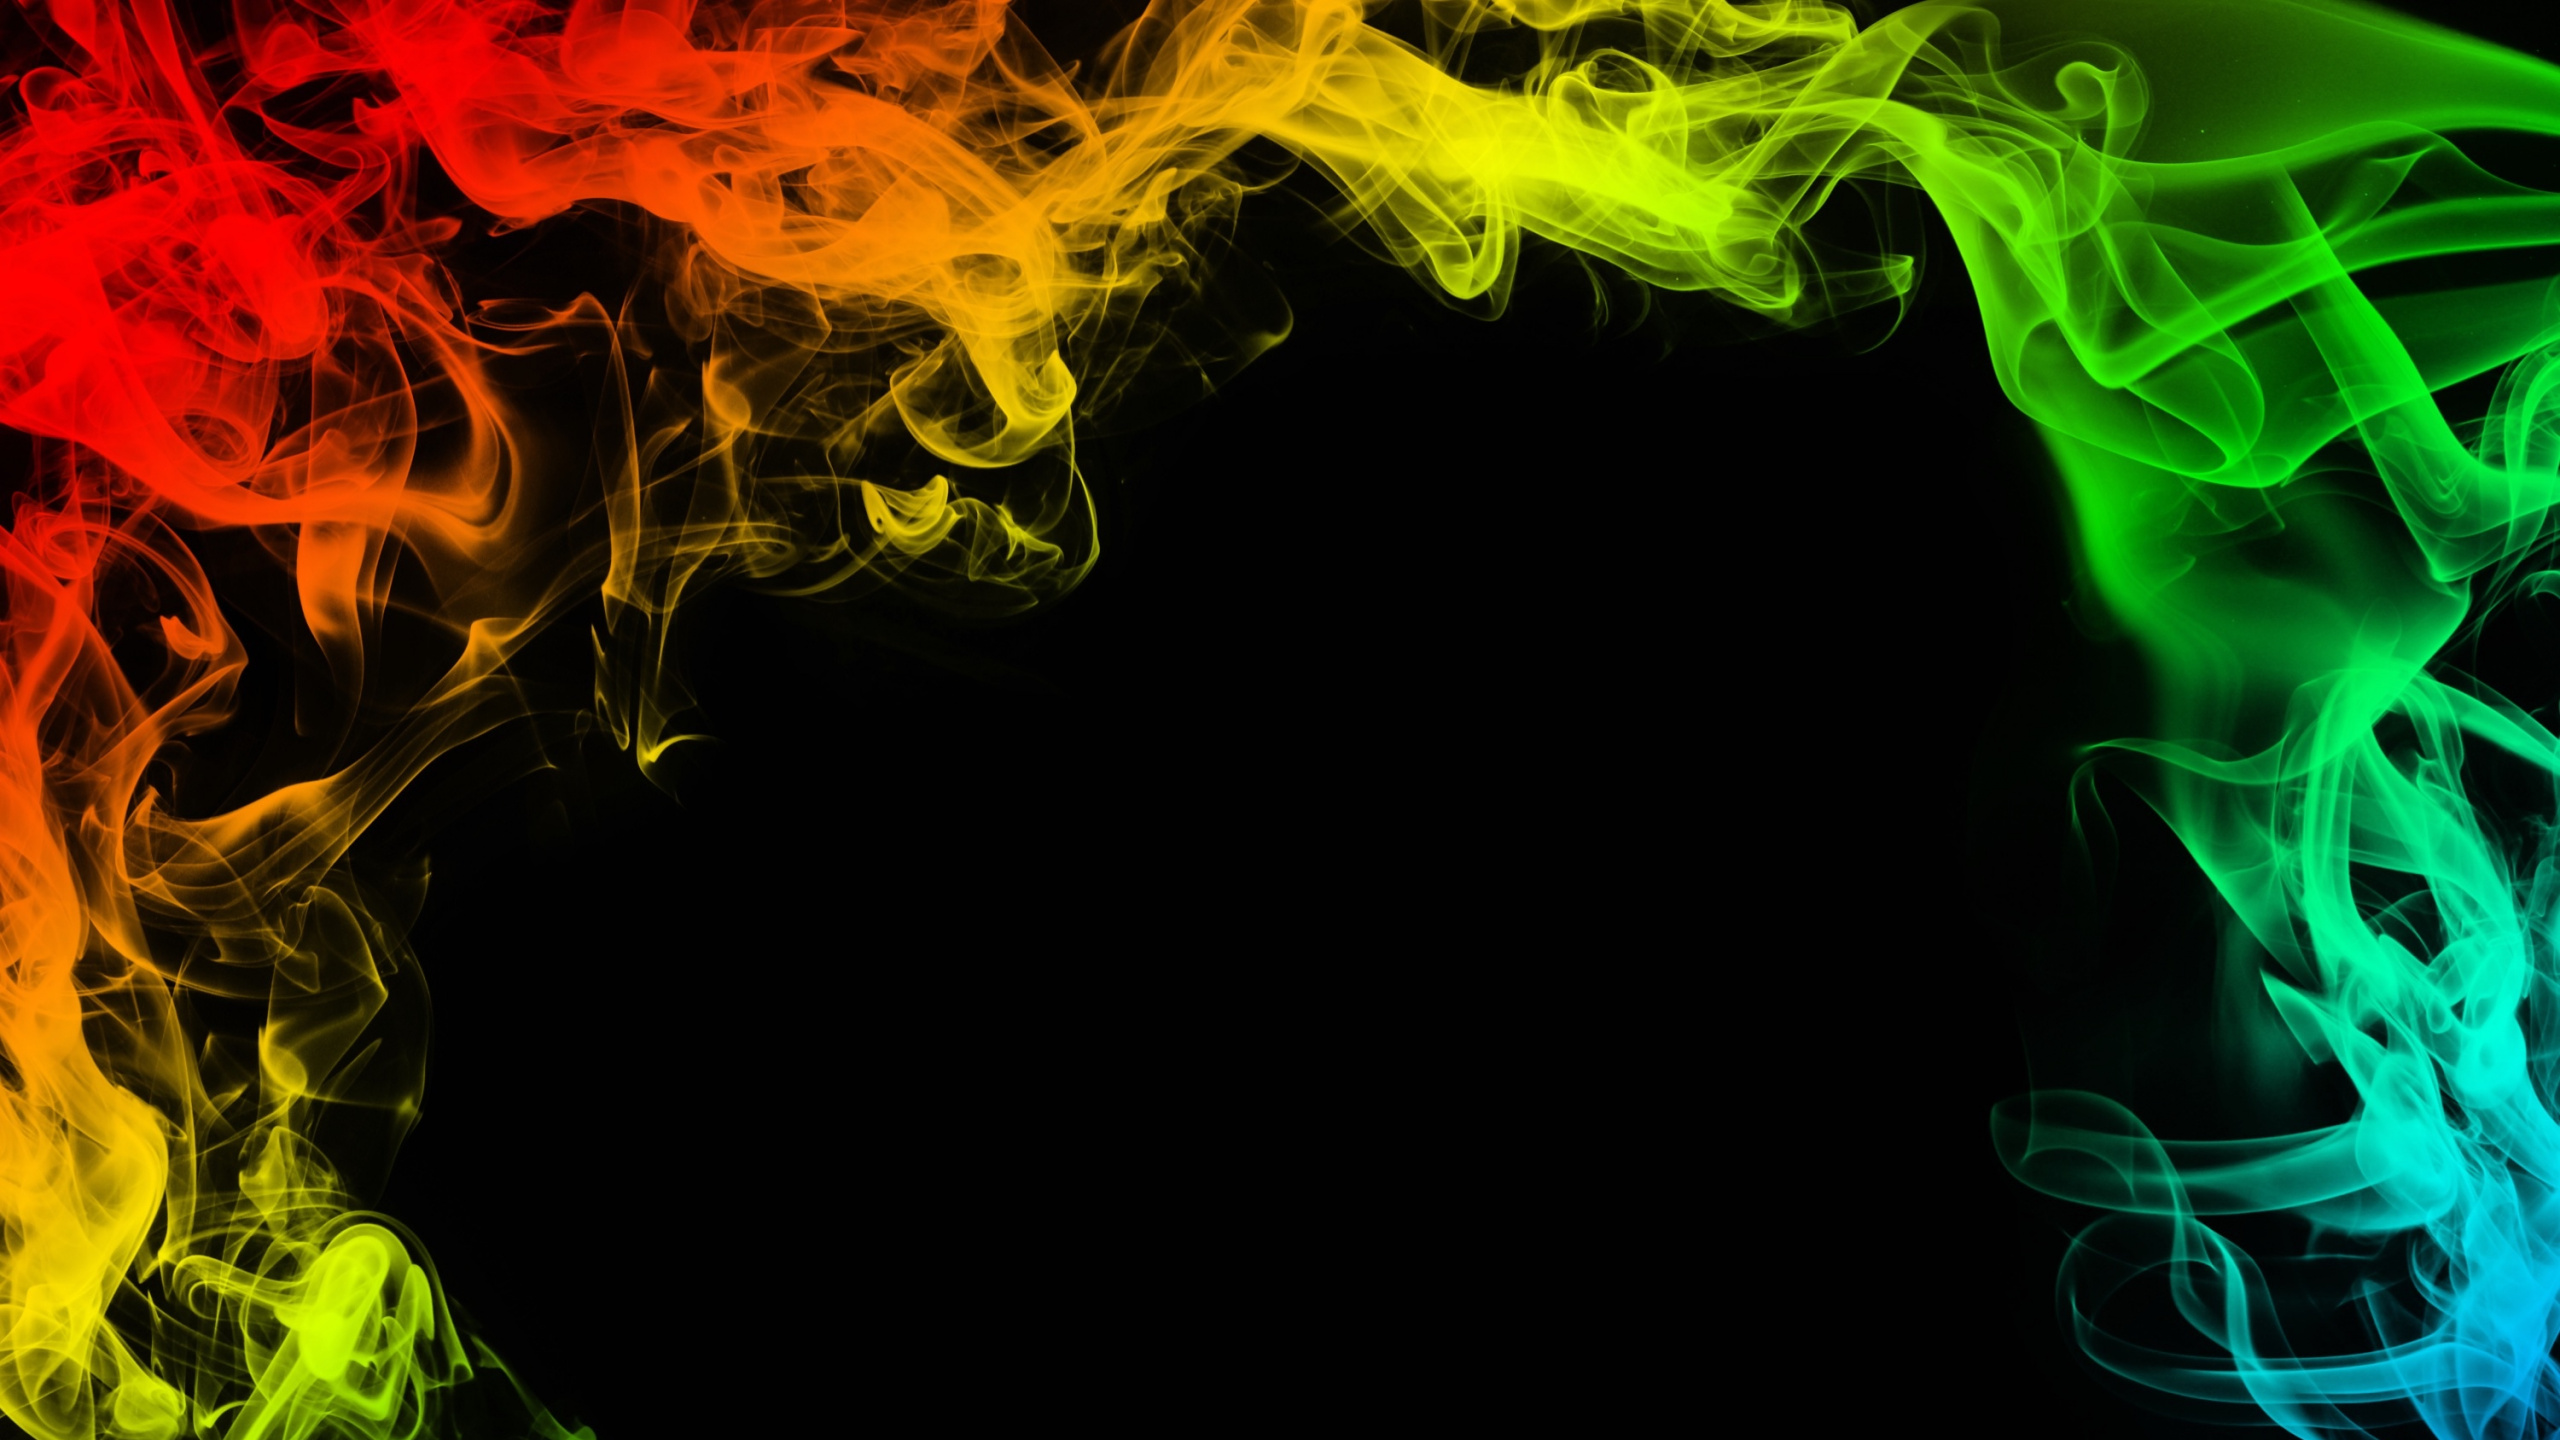 Purple and Blue Smoke Illustration. Wallpaper in 2560x1440 Resolution